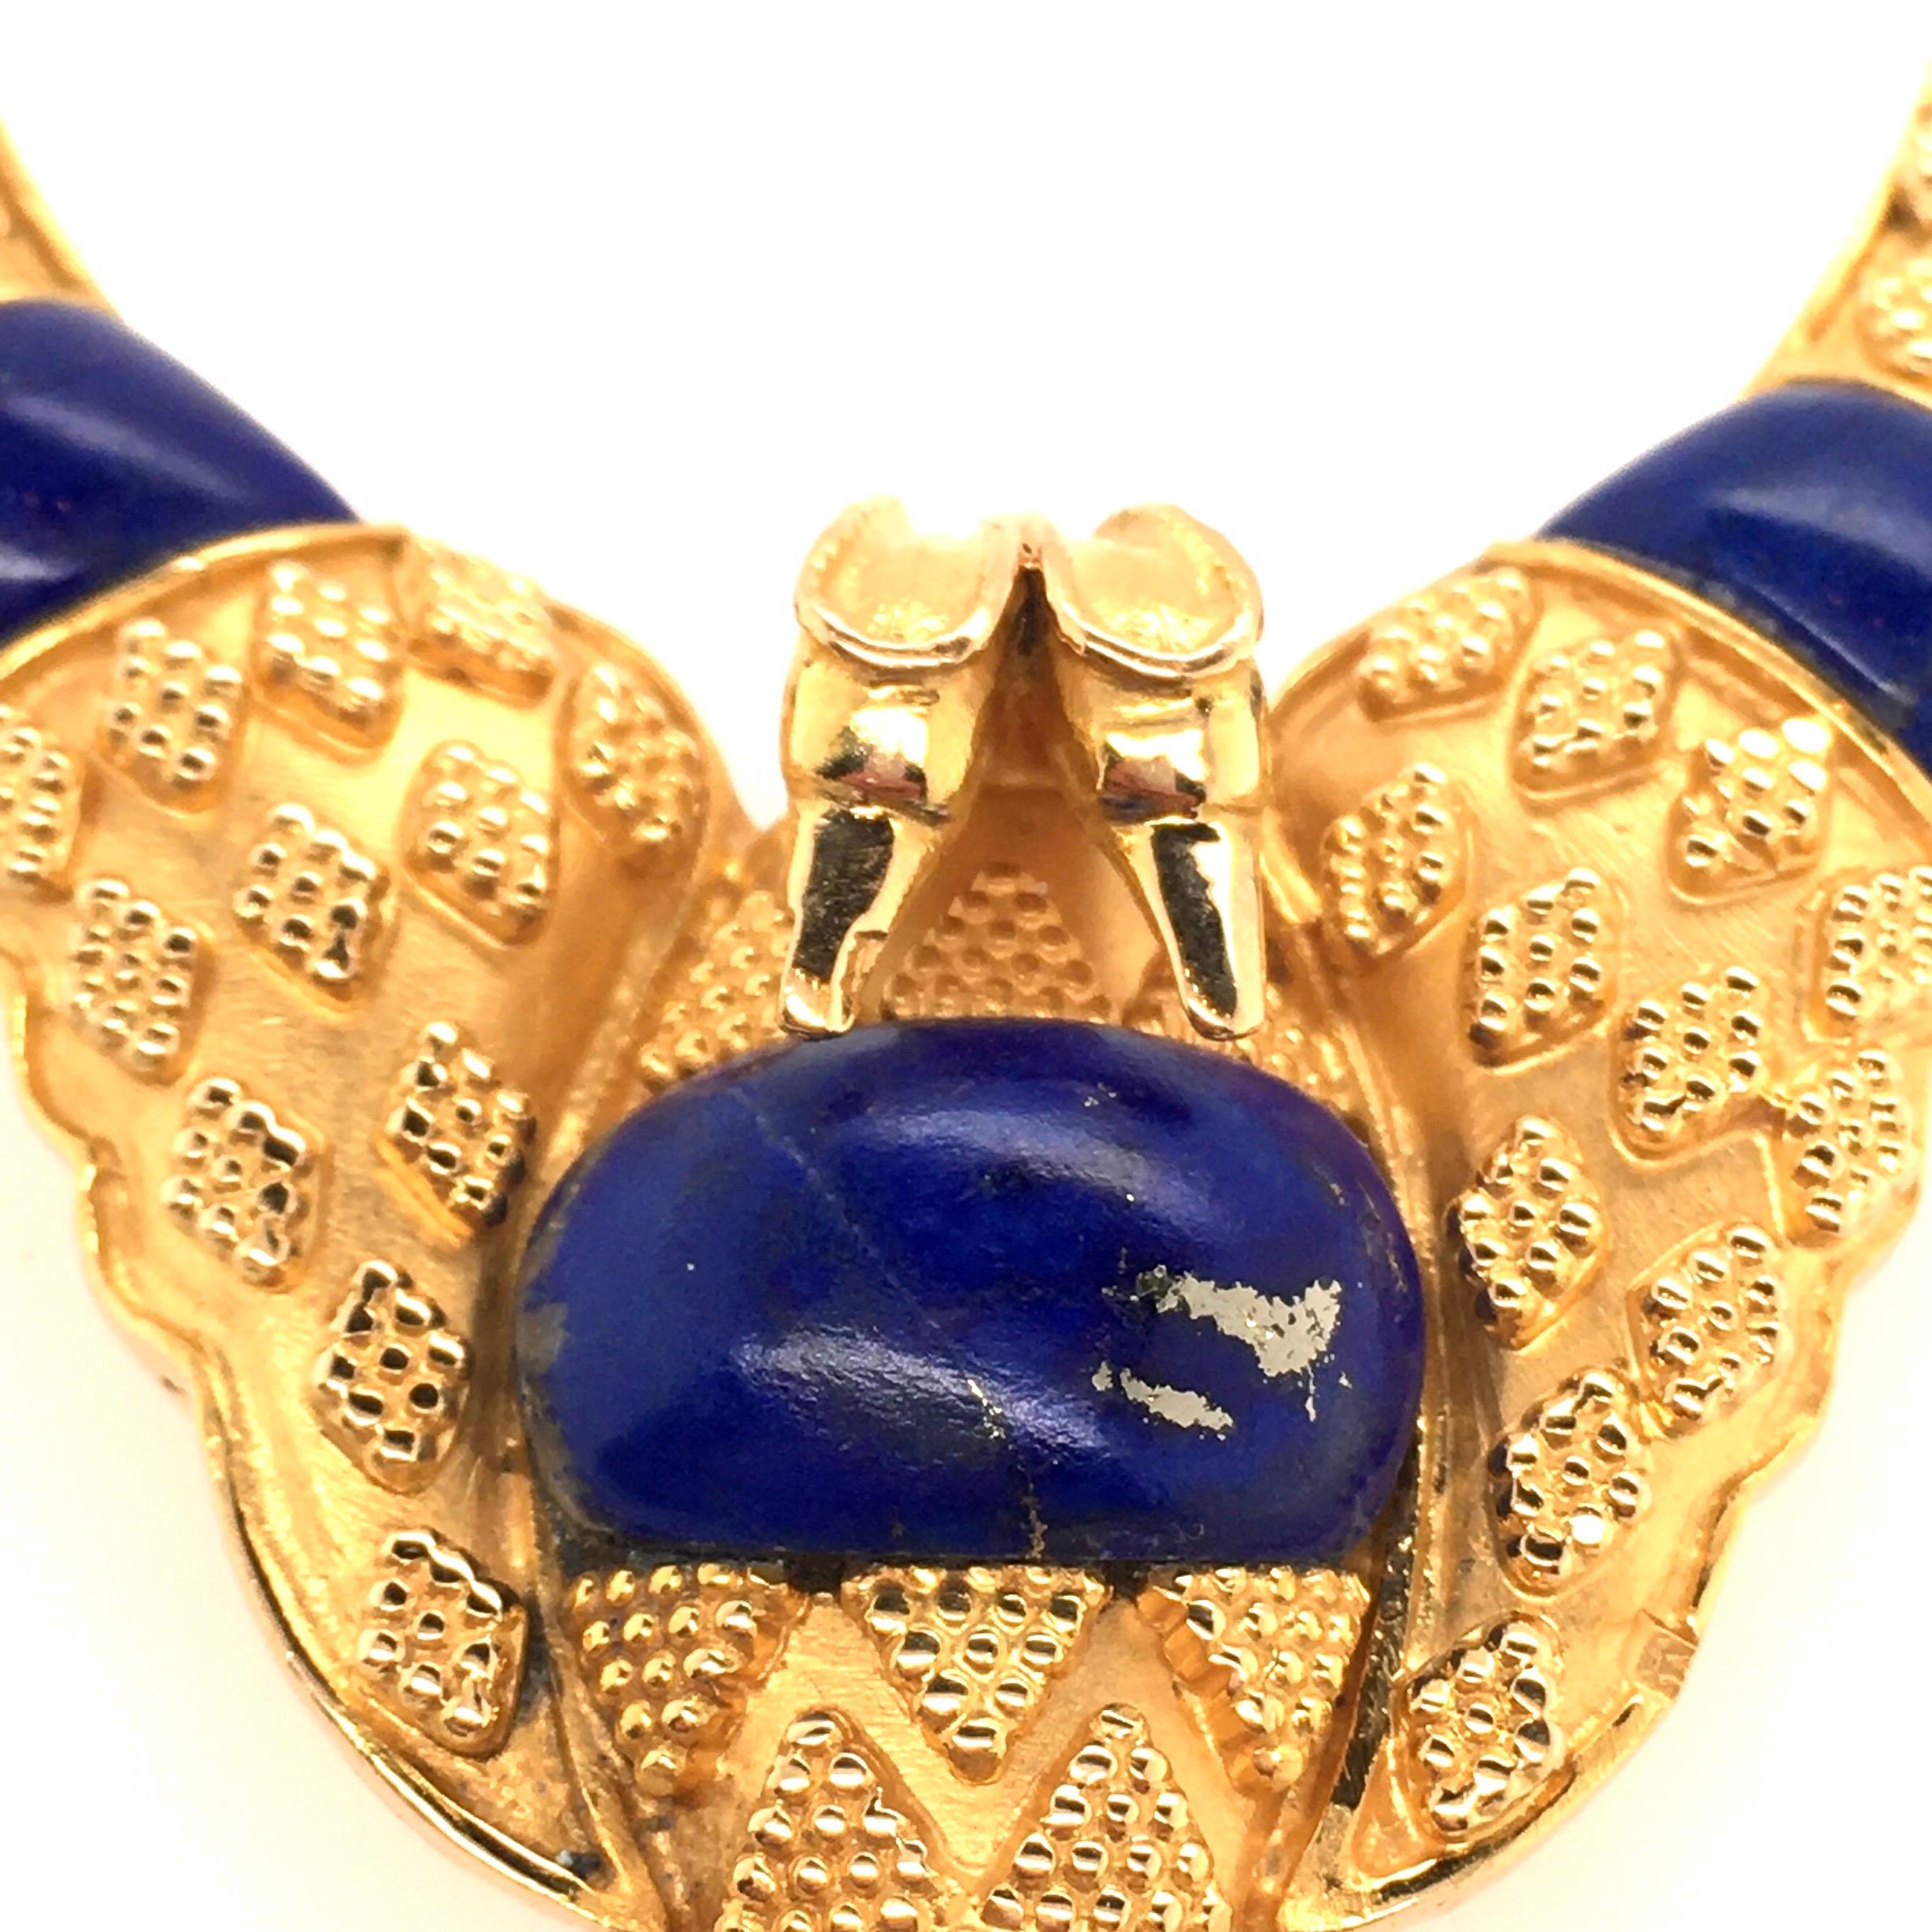 An 18 karat yellow gold and lapis lazuli double headed eagle brooch. Decorated with granulation, set with lapis lazuli panels. The brooch measures approximately 2 x 1/3/4 inches, gross weight is approximately 26.7 grams. 